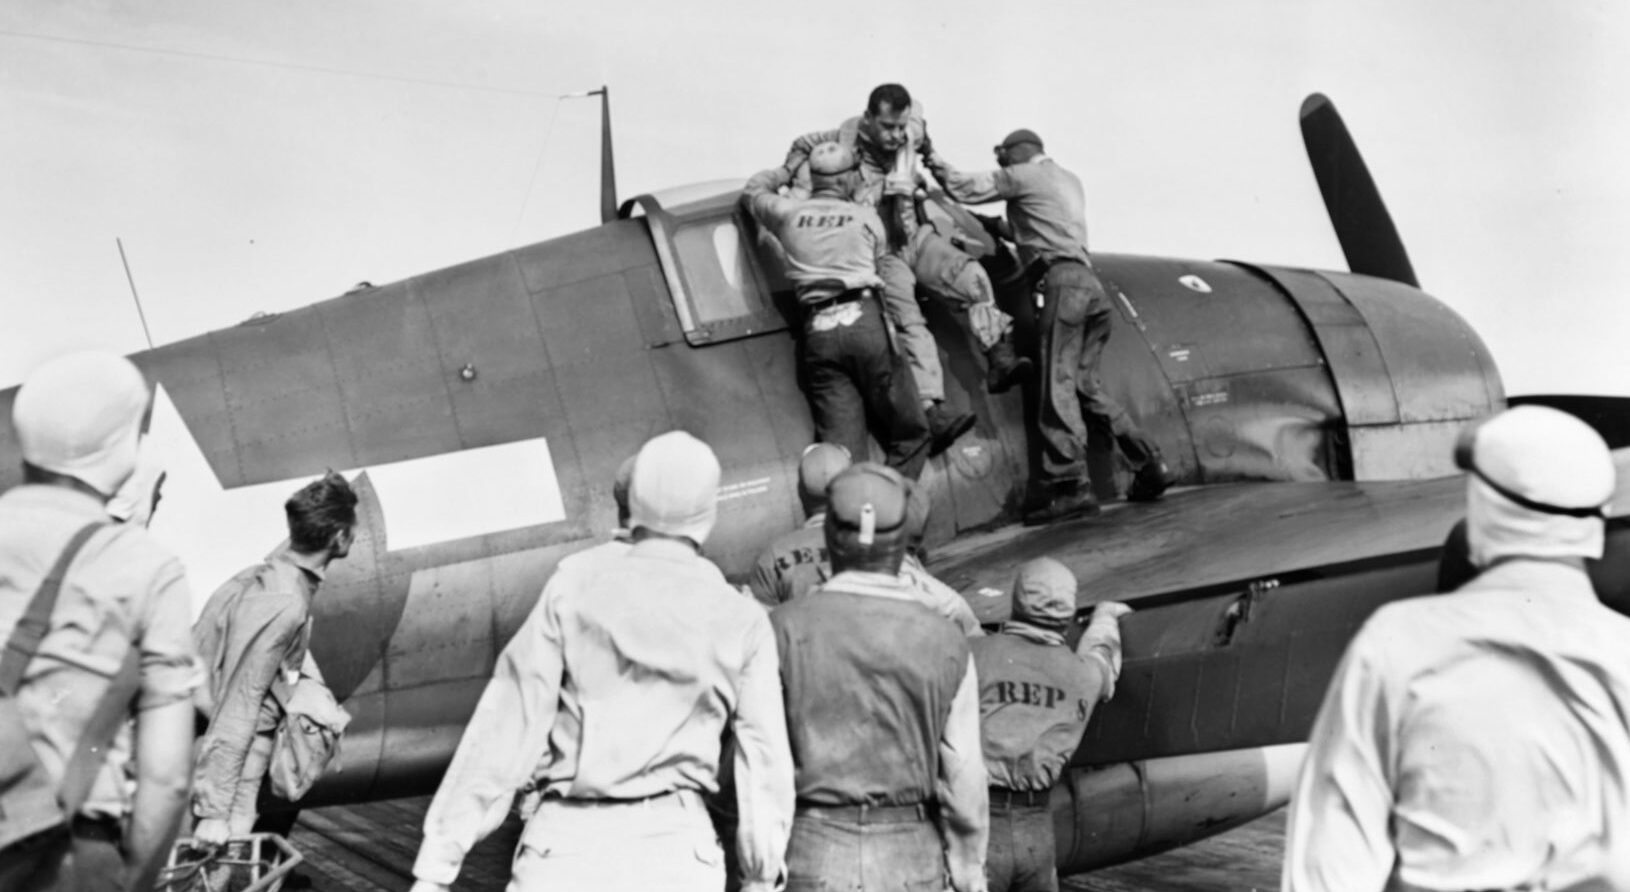 The pilot of a U.S. Navy Grumman F6F Hellcat fighter is assisted from the cockpit of his plane after a mission.  American fighters shot down so many Japanese planes that one pilot dubbed the affair the ‘Great Marianas Turkey Shoot.’